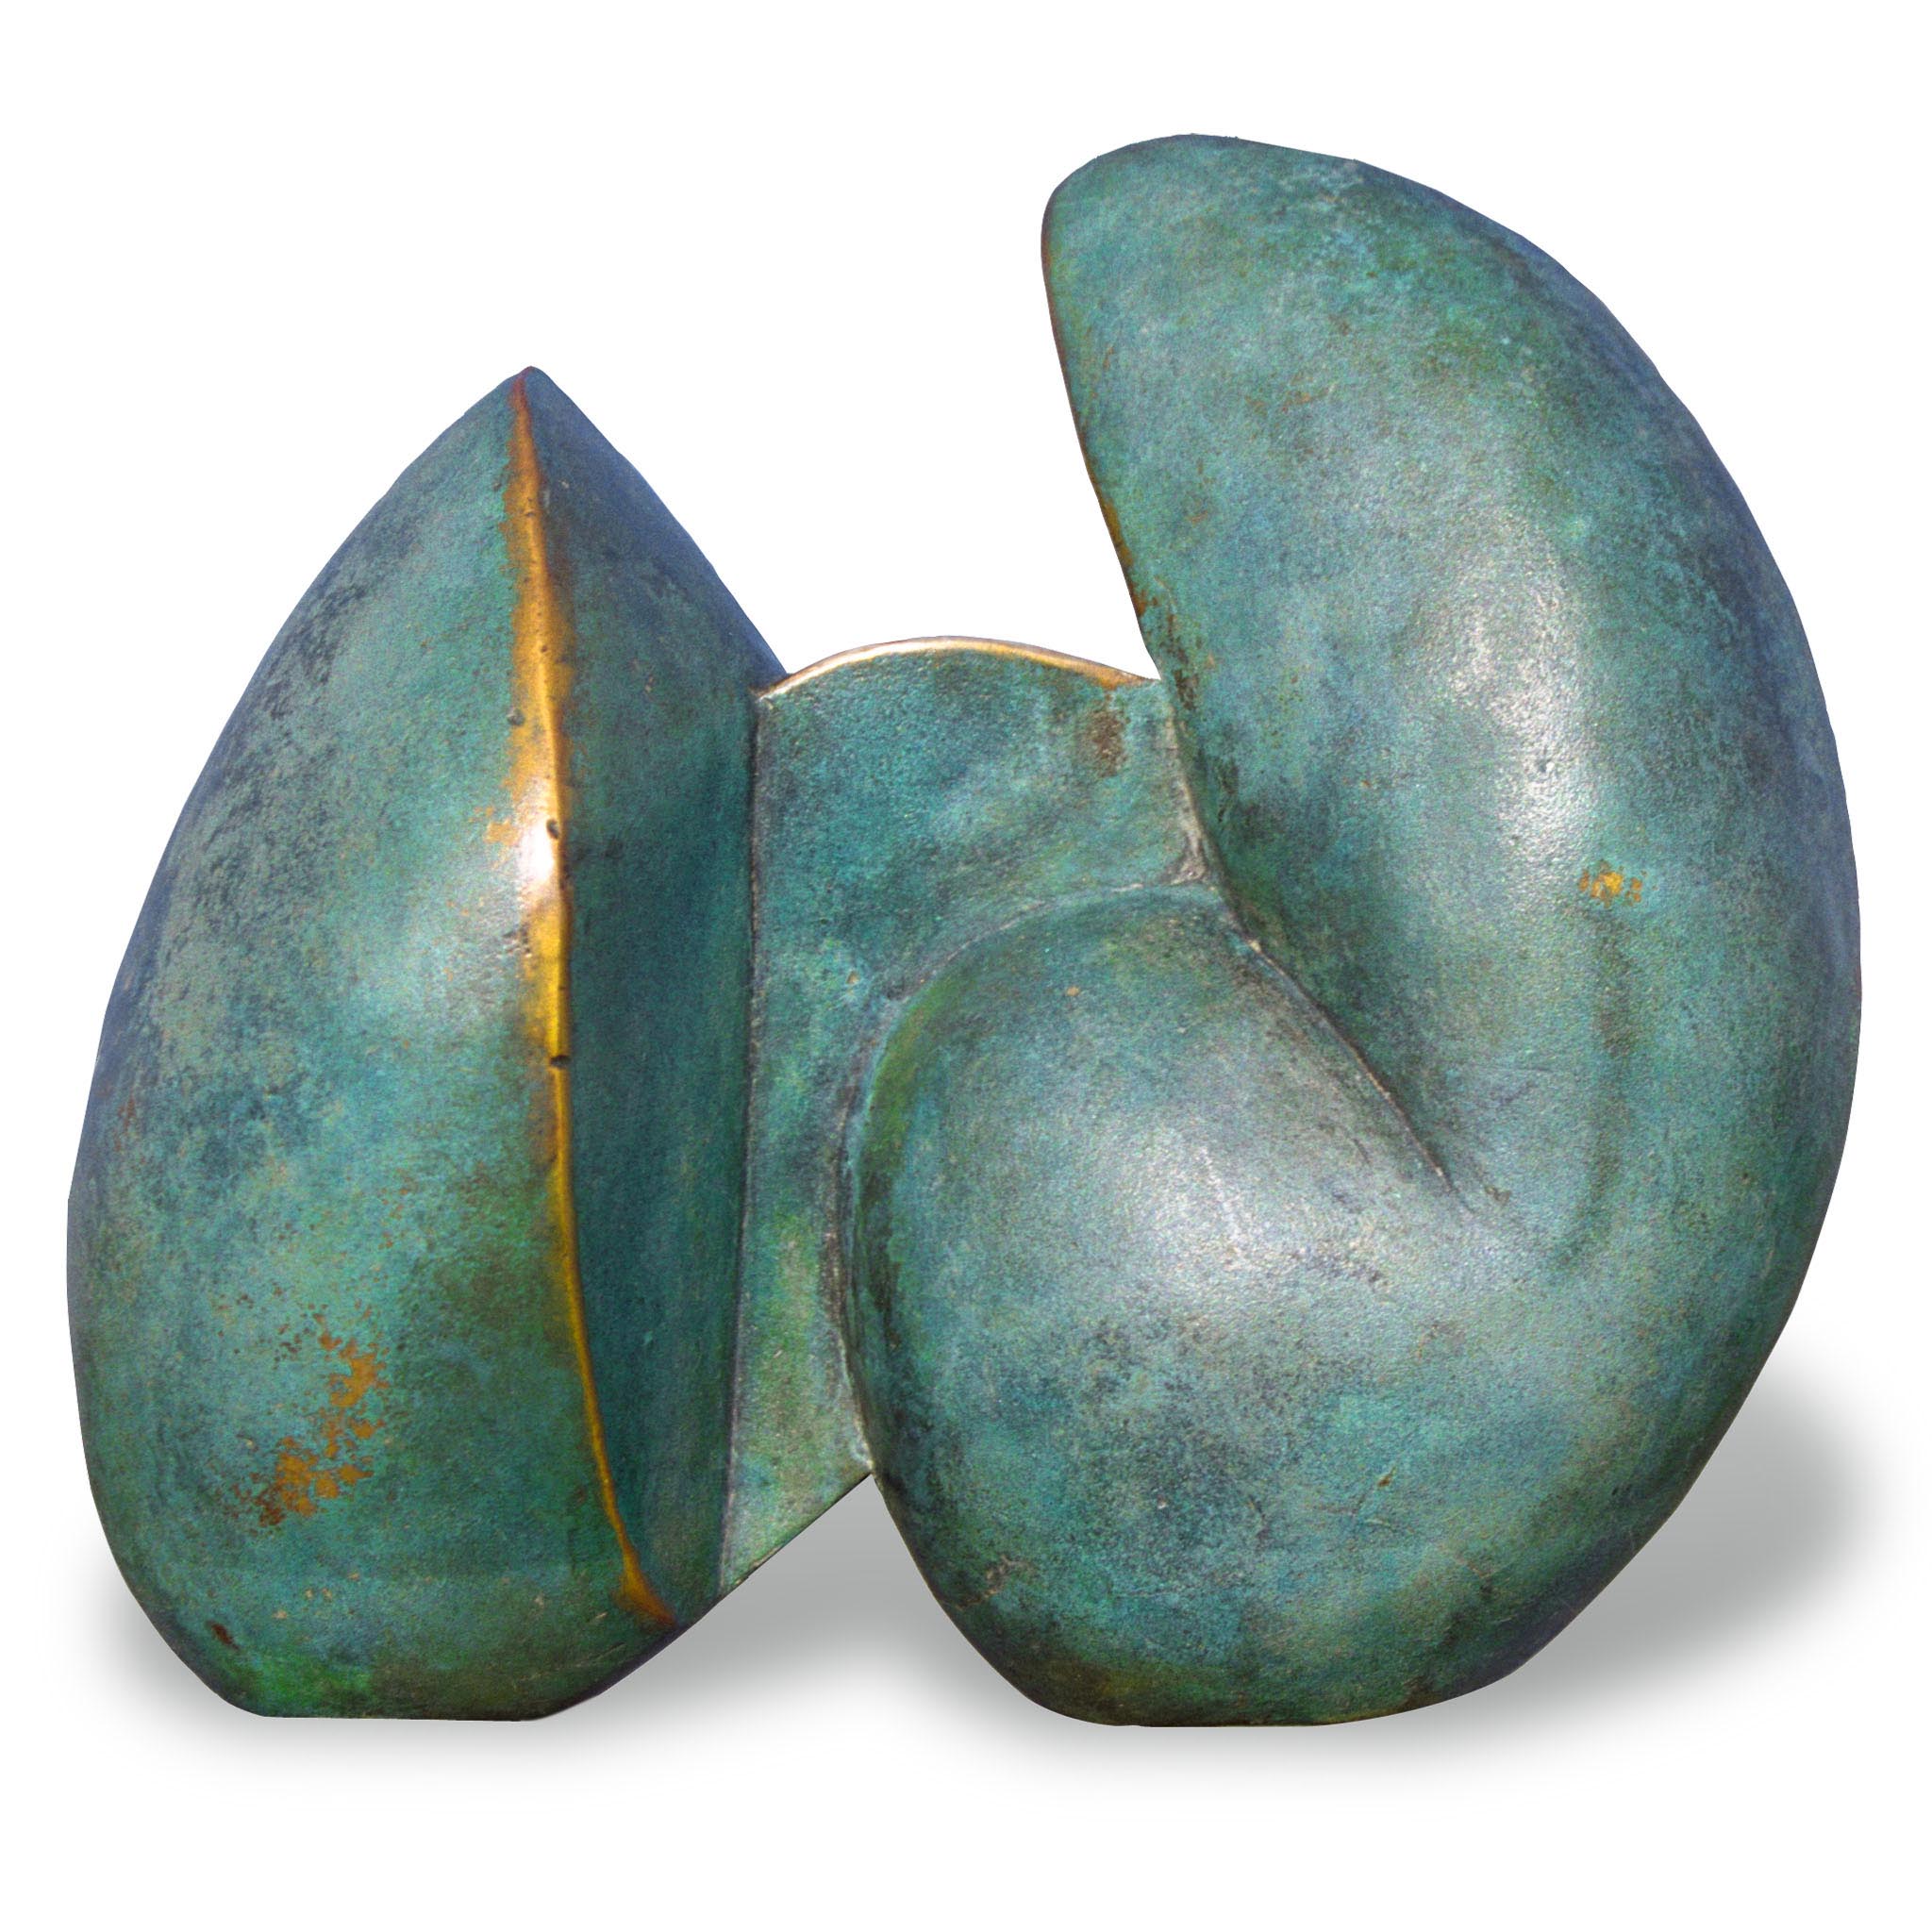 Spiral Forms - Abstract geometric bronze sculpture by Stephen Williams